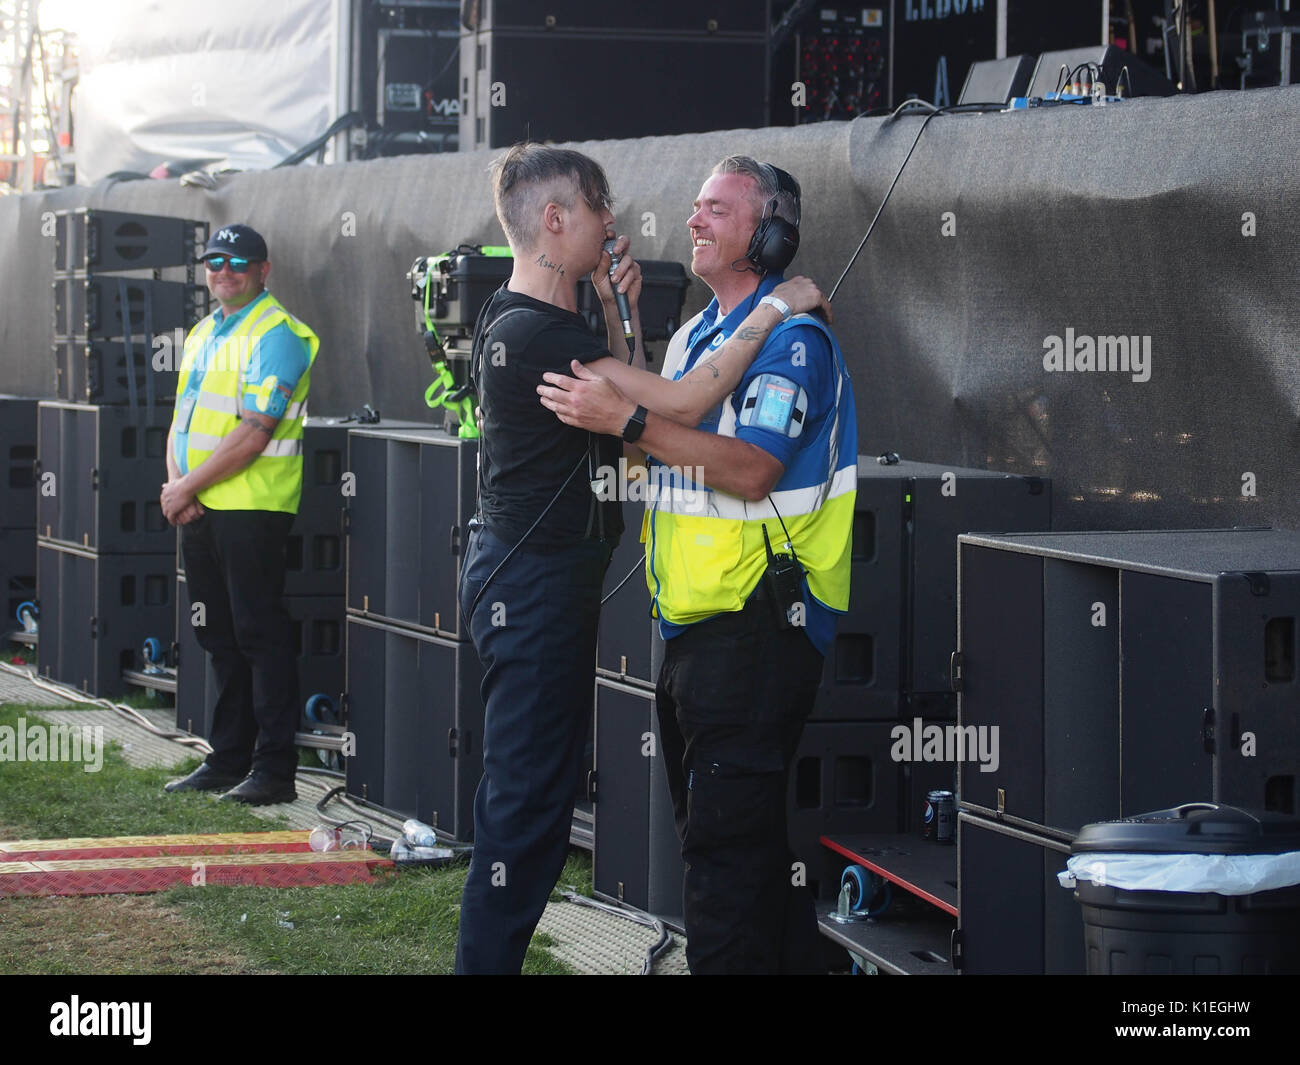 Portsmouth, Hampshire, England, 27 August 2017 Pete Doherty has some fun with security during his set at the Victorious festival prior to being removed from the stage for overruning and refusing to end his set. Credit: simon evans/Alamy Live News Stock Photo